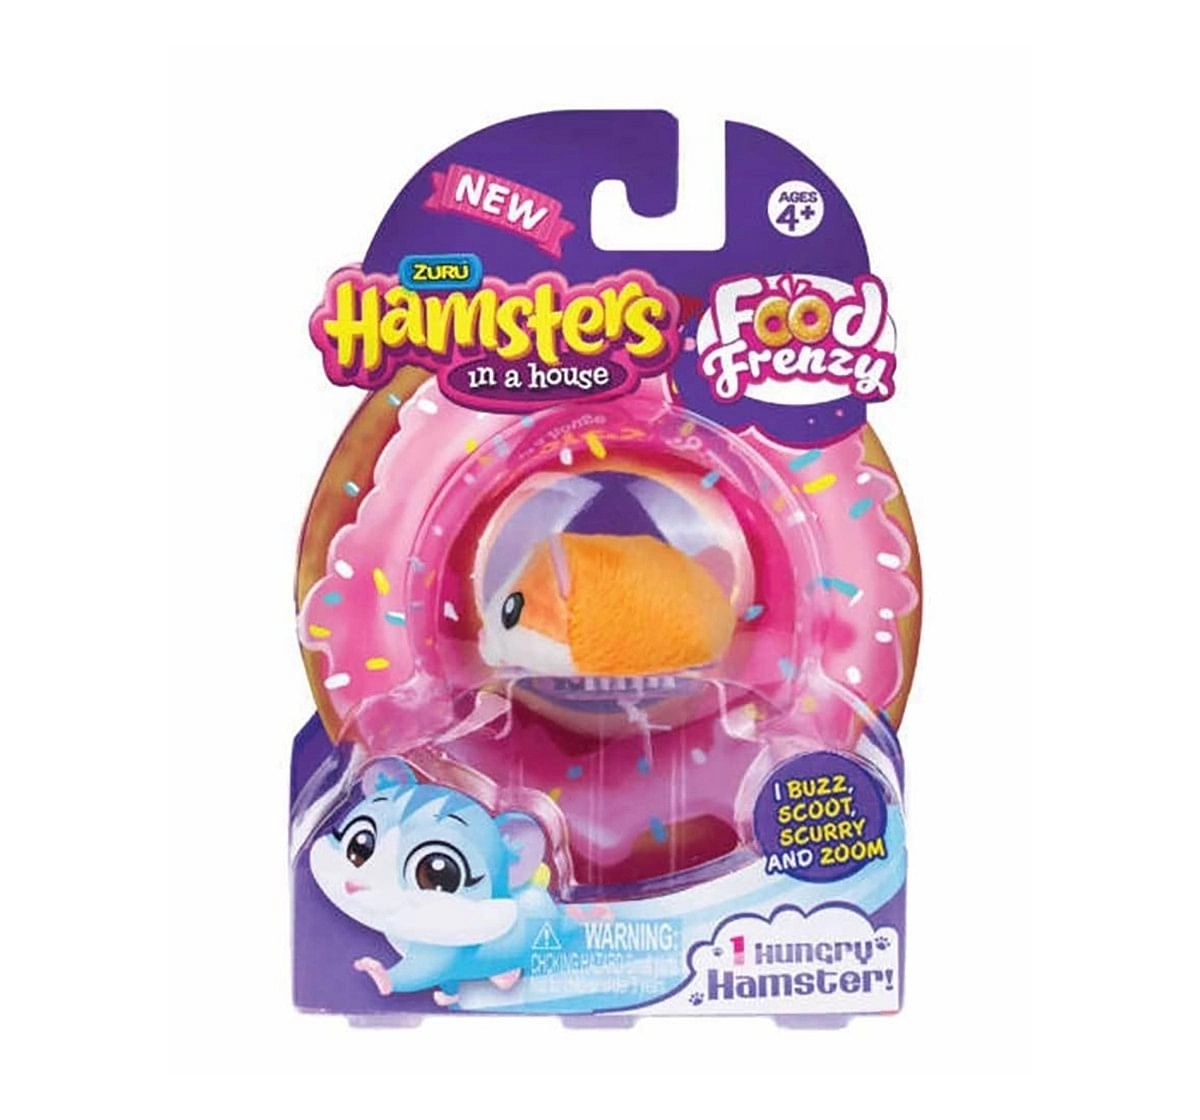 Zuru Hamsters in a House Nibbles and Chip Food Frenzy Hungry Hamster (Set of 1) Collectable Dolls for Kids age 4Y+ 